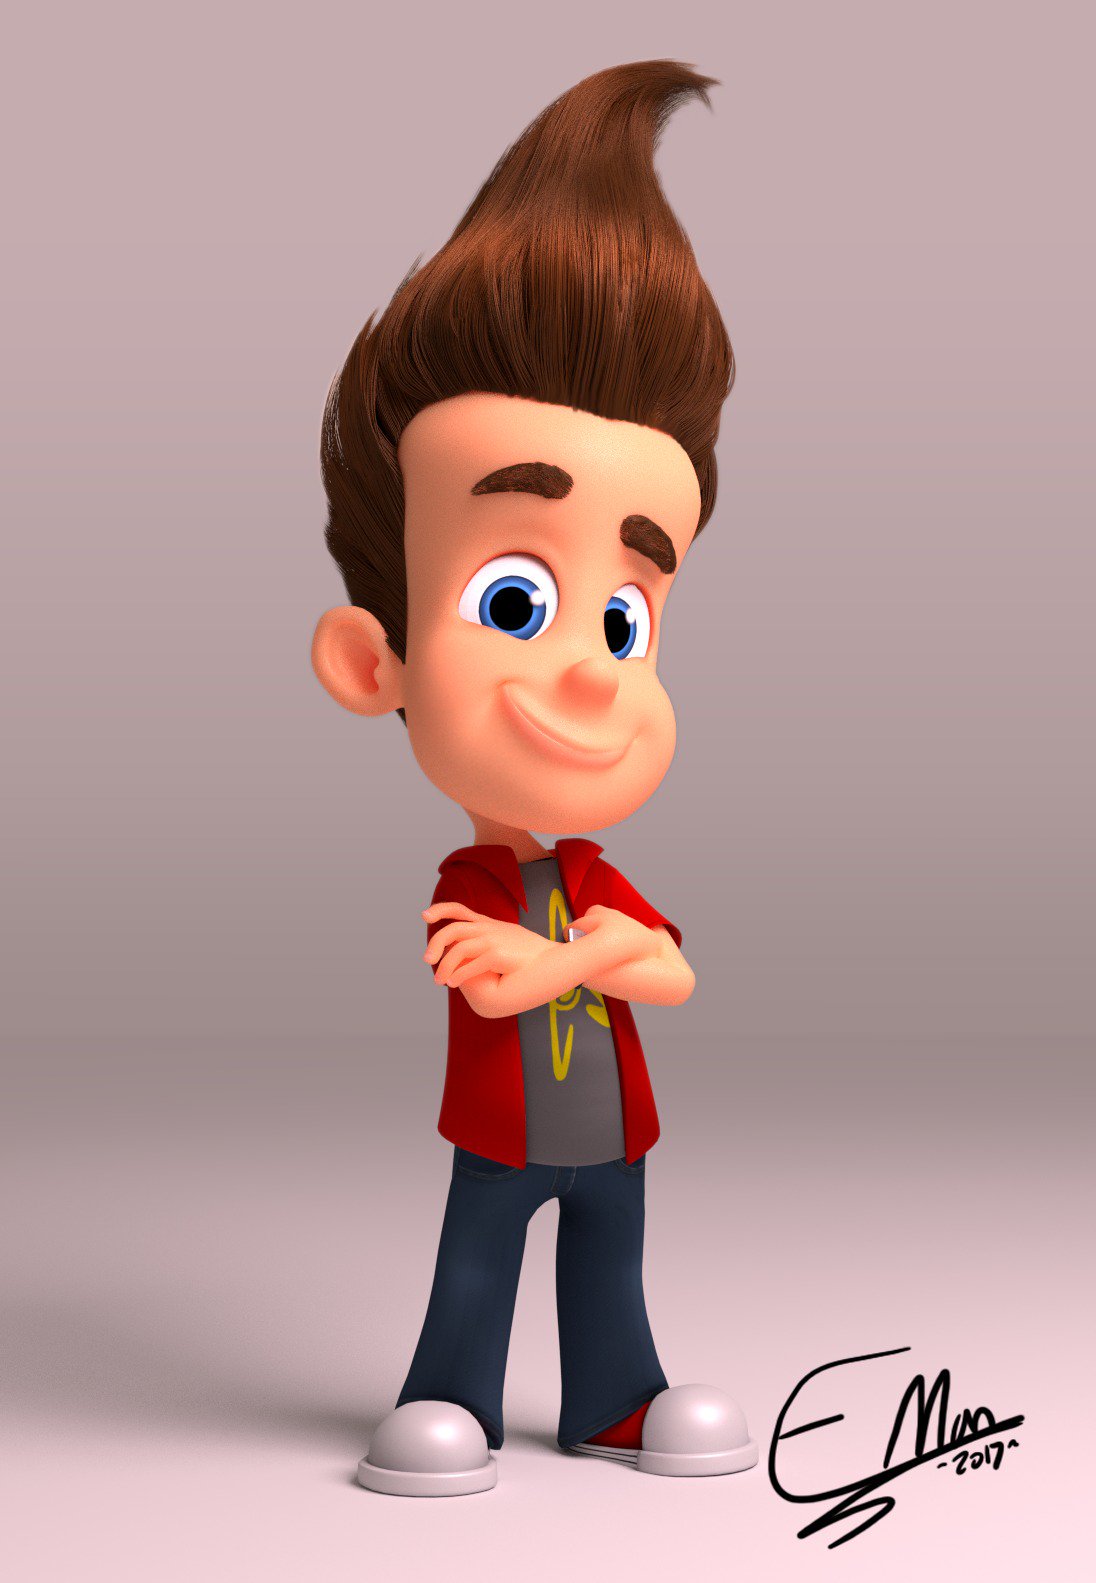 I tried rendering what Jimmy Neutron might look like in more modern animation. The Adventures of Jimmy Neutron: Boy Genius